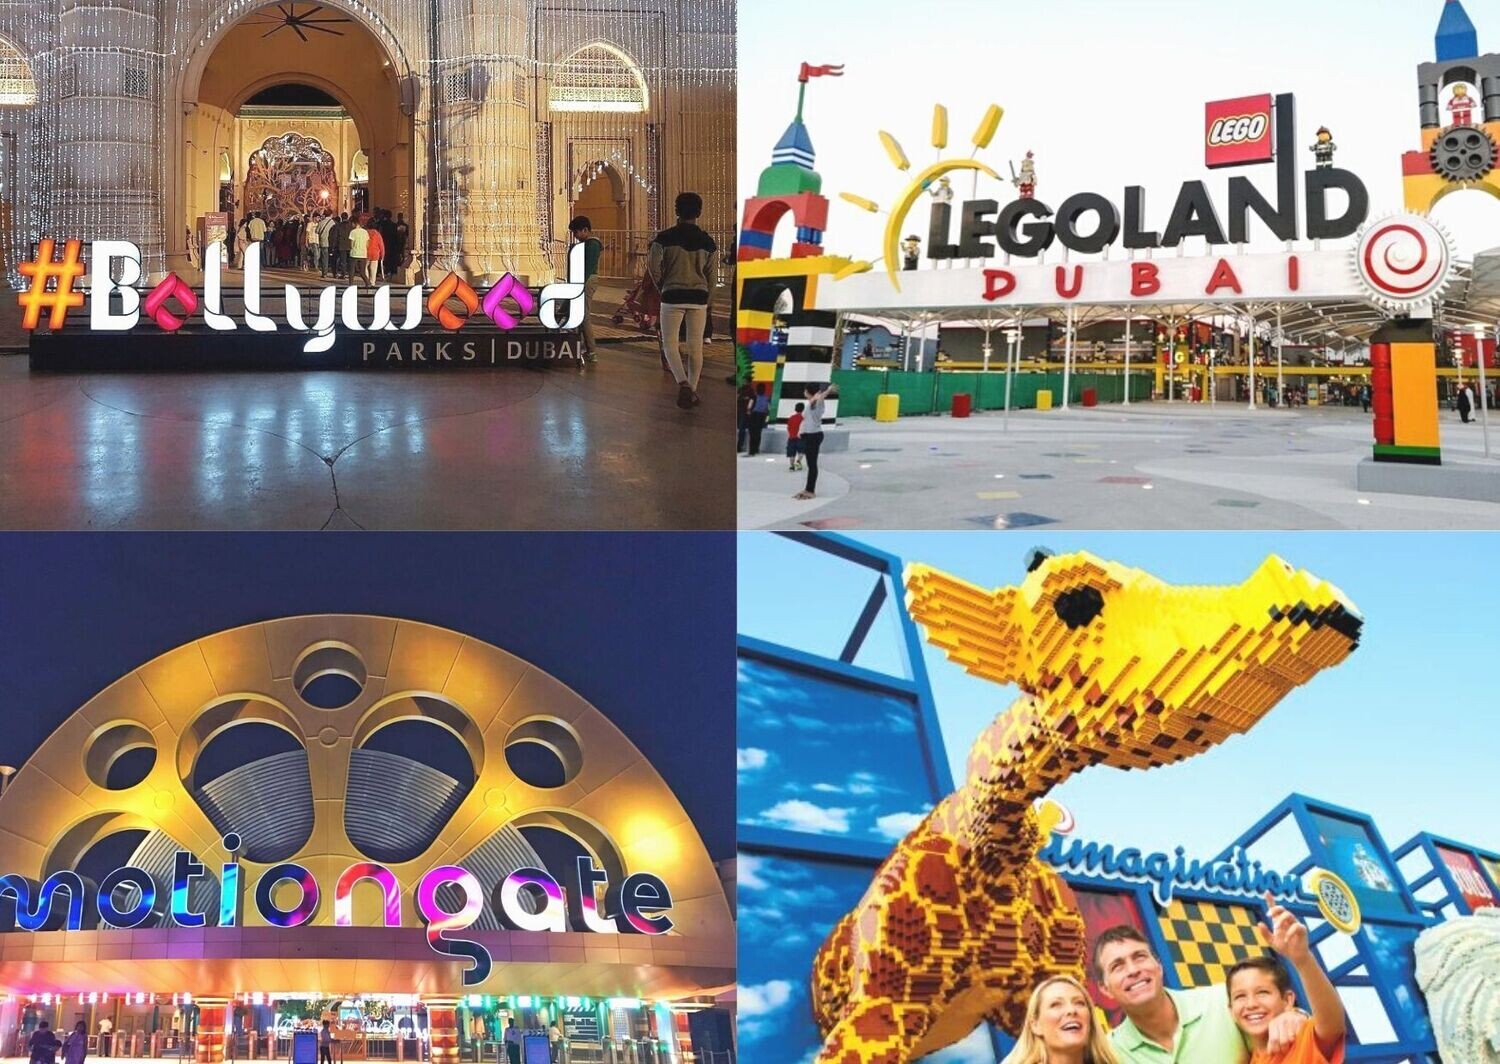 Bollywood Park + (Motiongate/Legoland/Legoland Waterpark) + Meal in Bollywood